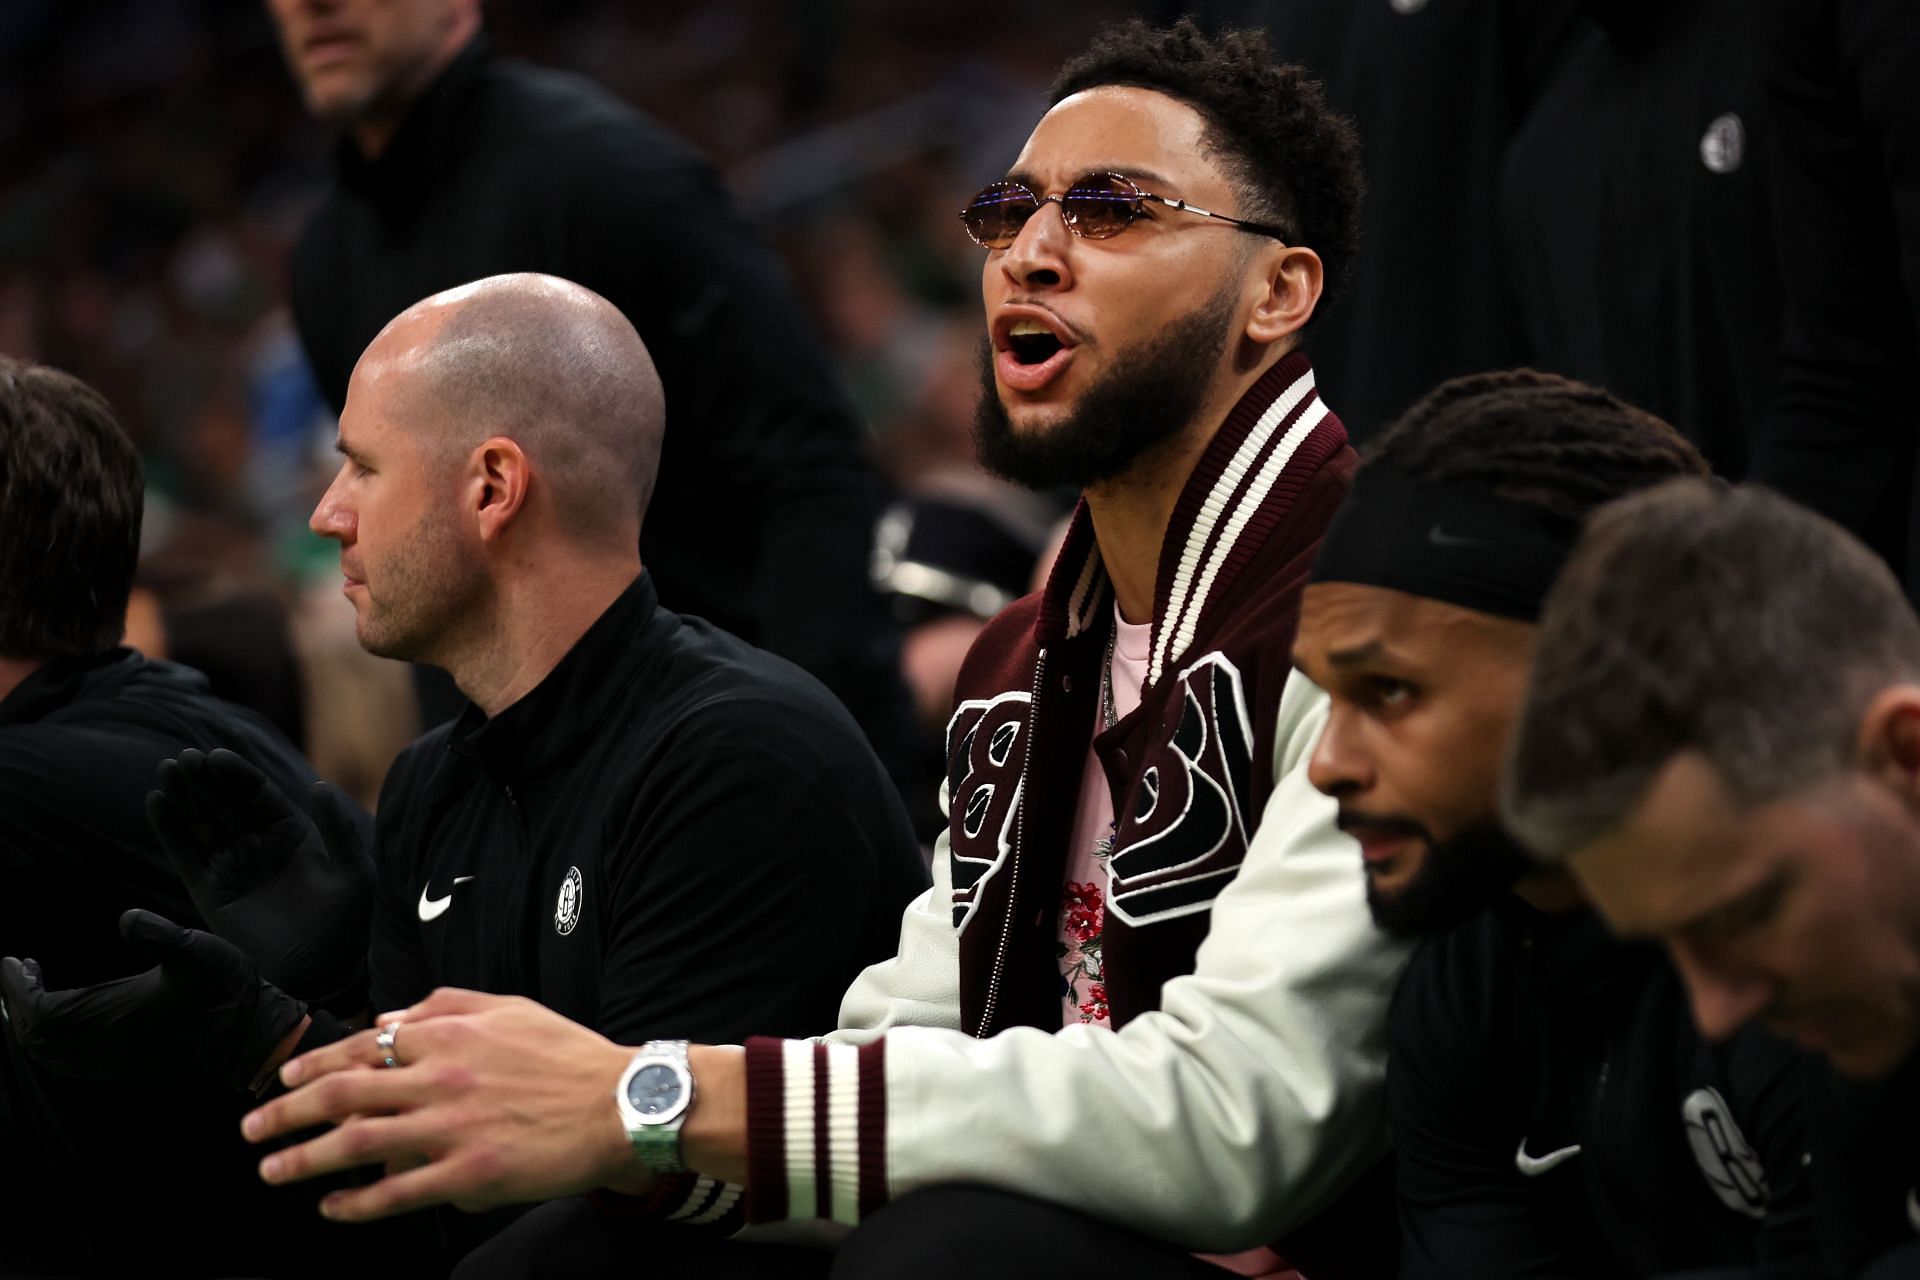 Ben Simmons of the Brooklyn Nets sits during the first quarter of Game 1 of the first round of the Eastern Conference playoffs against the Boston Celtics at TD Garden on April 17 in Boston, Massachusetts